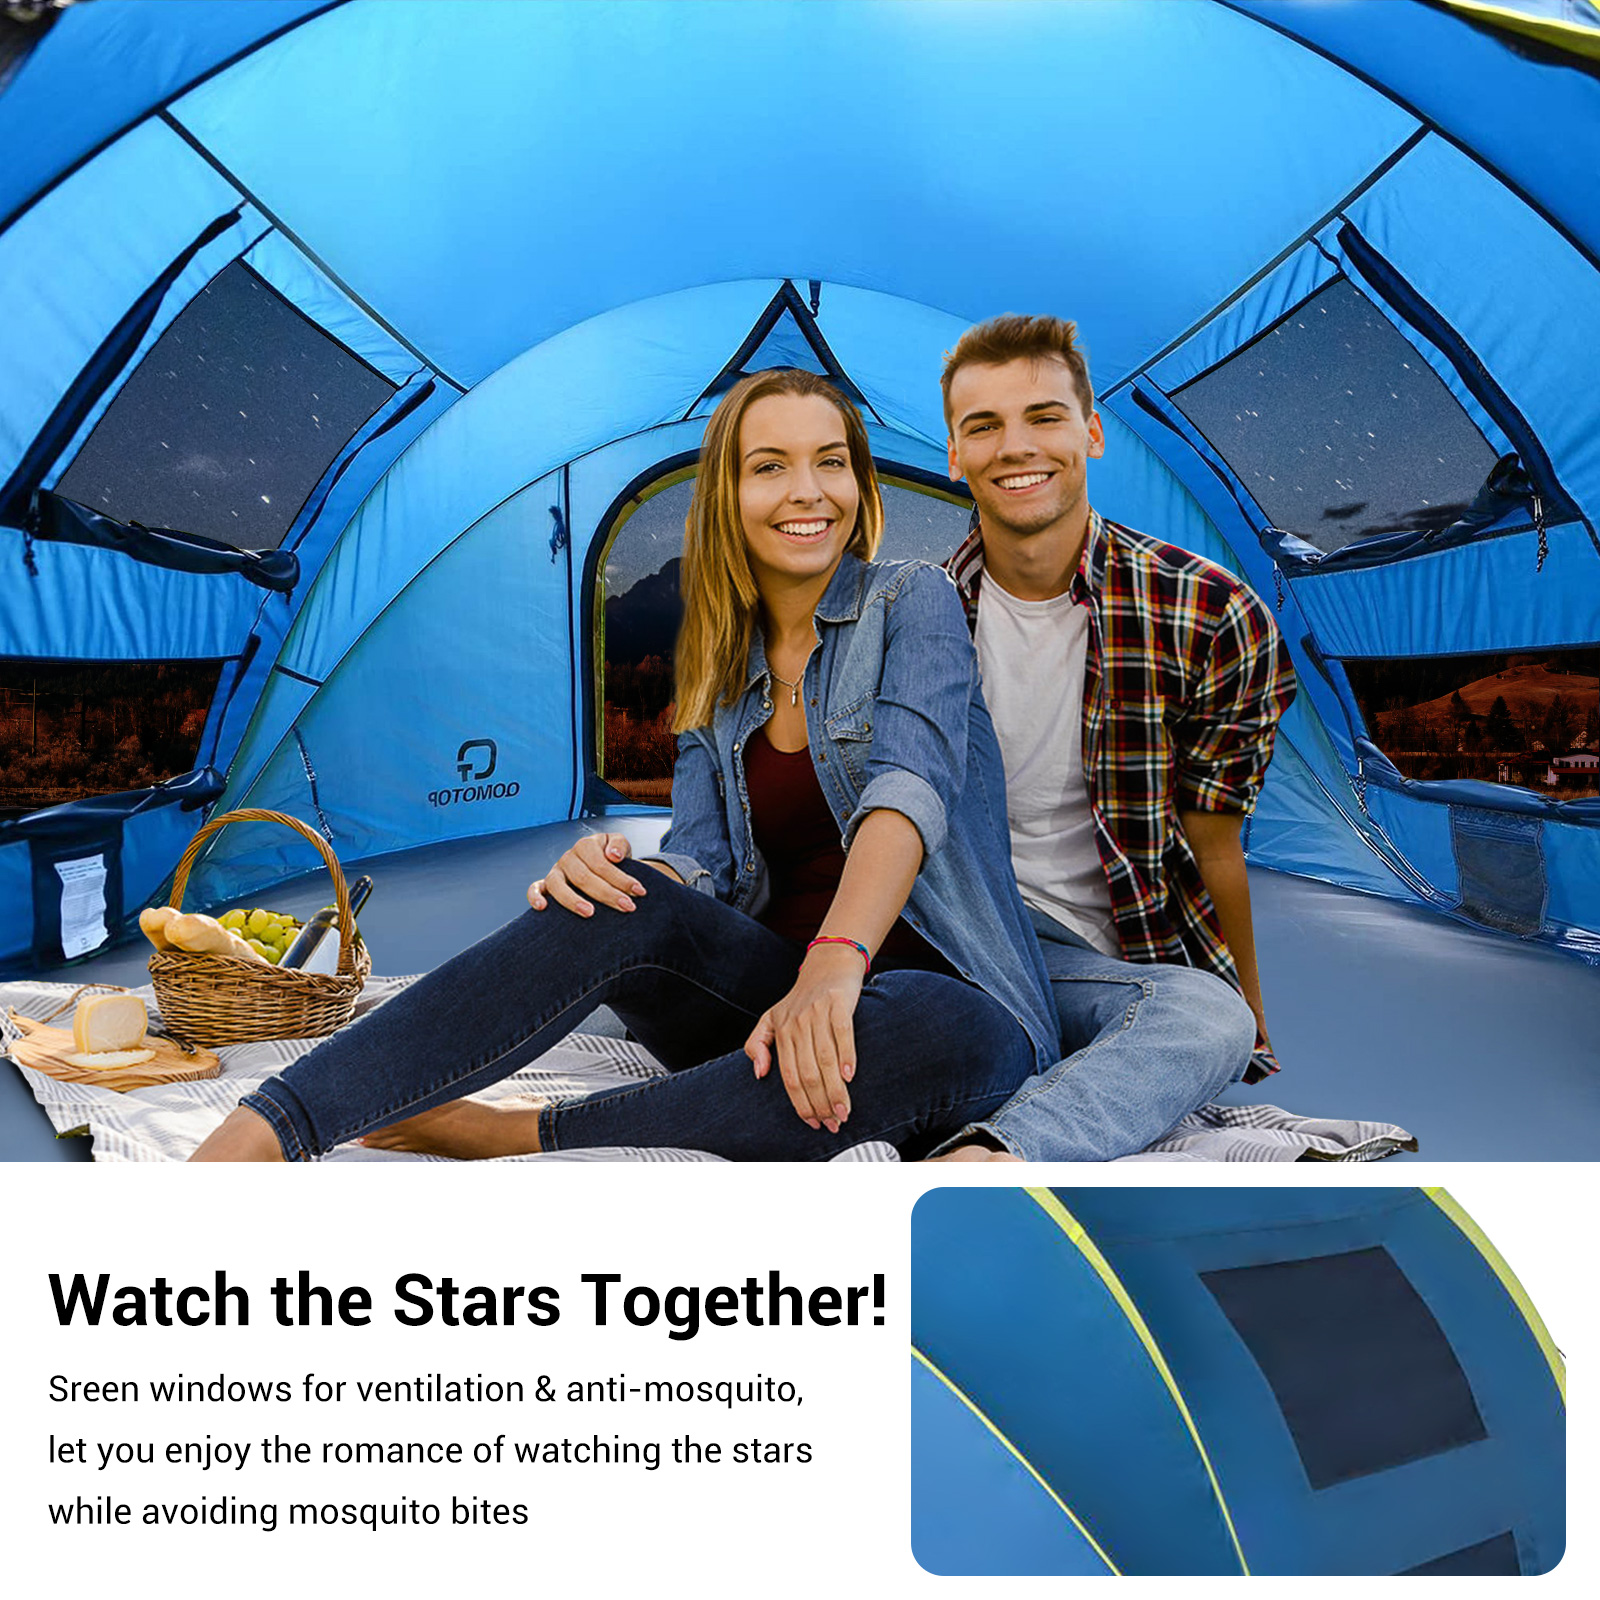 QOMOTOP Instant Tent 4-Person Camp Tent, Automatic Setup Pop Up Tent, Waterproof, Huge Side Screen Windows, Blue - image 3 of 8